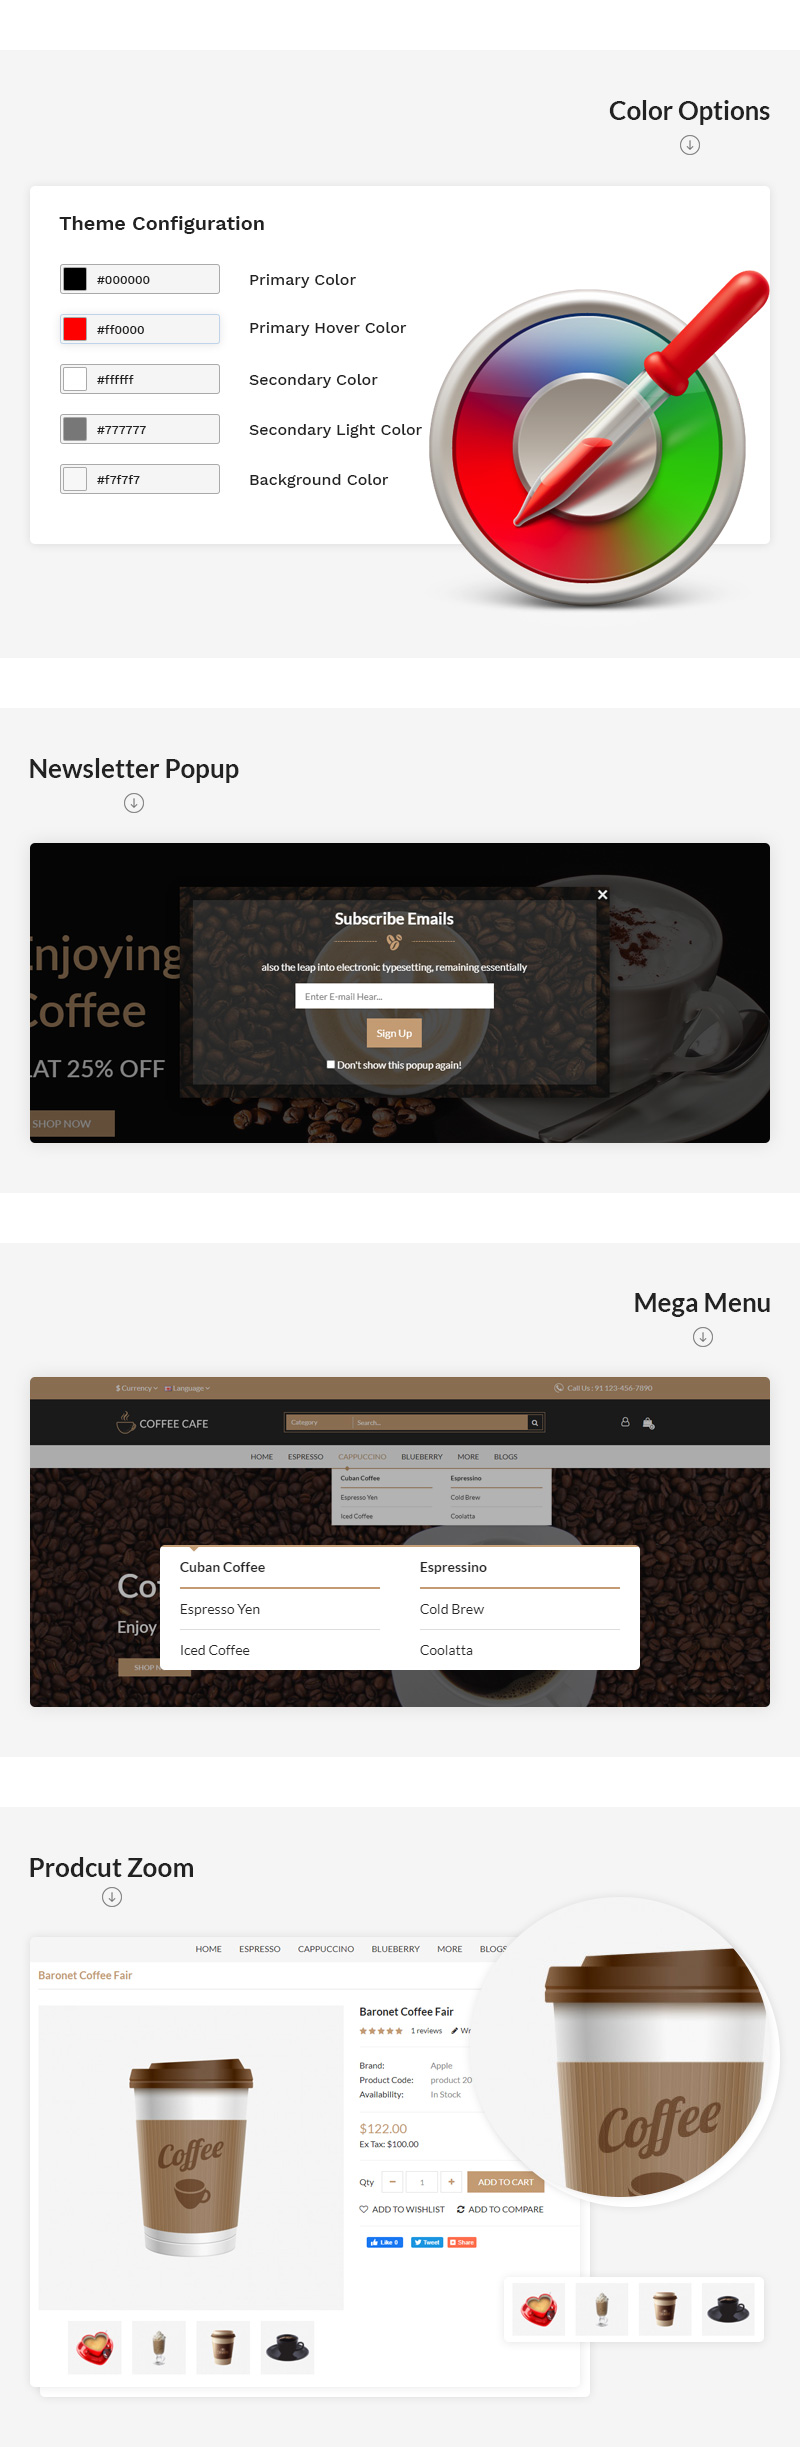 coffee-cafe-features-3.jpg